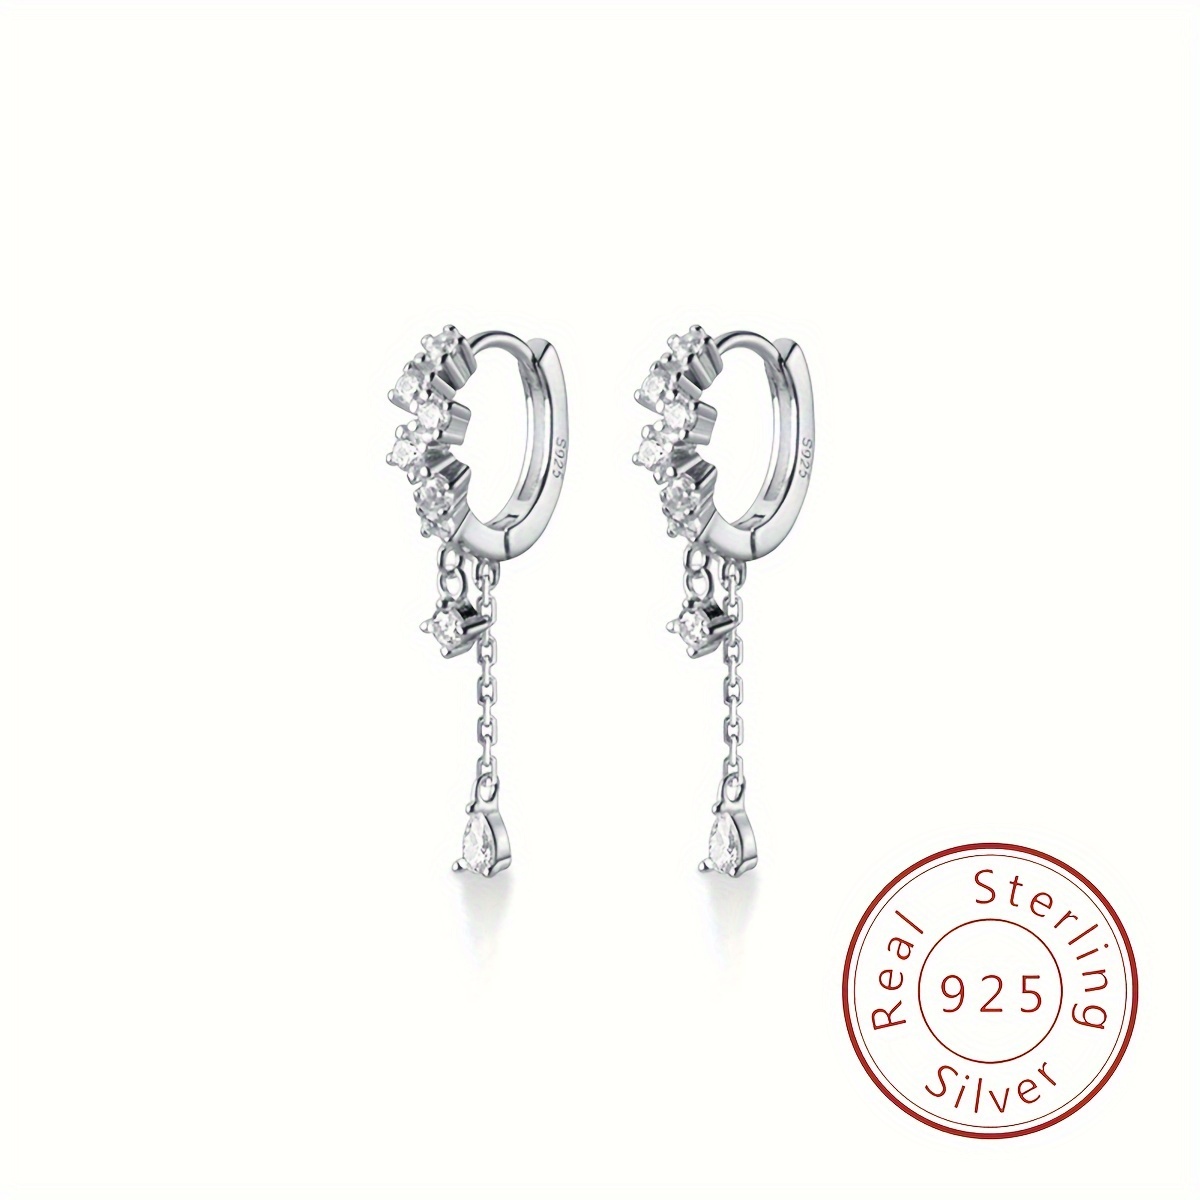 

1 Pair Of Exquisite New Micro Embedded Zirconia 925 Sterling Silver Tassel Water Drop Earrings For Women To Give As A Birthday Gift To Their Girlfriend